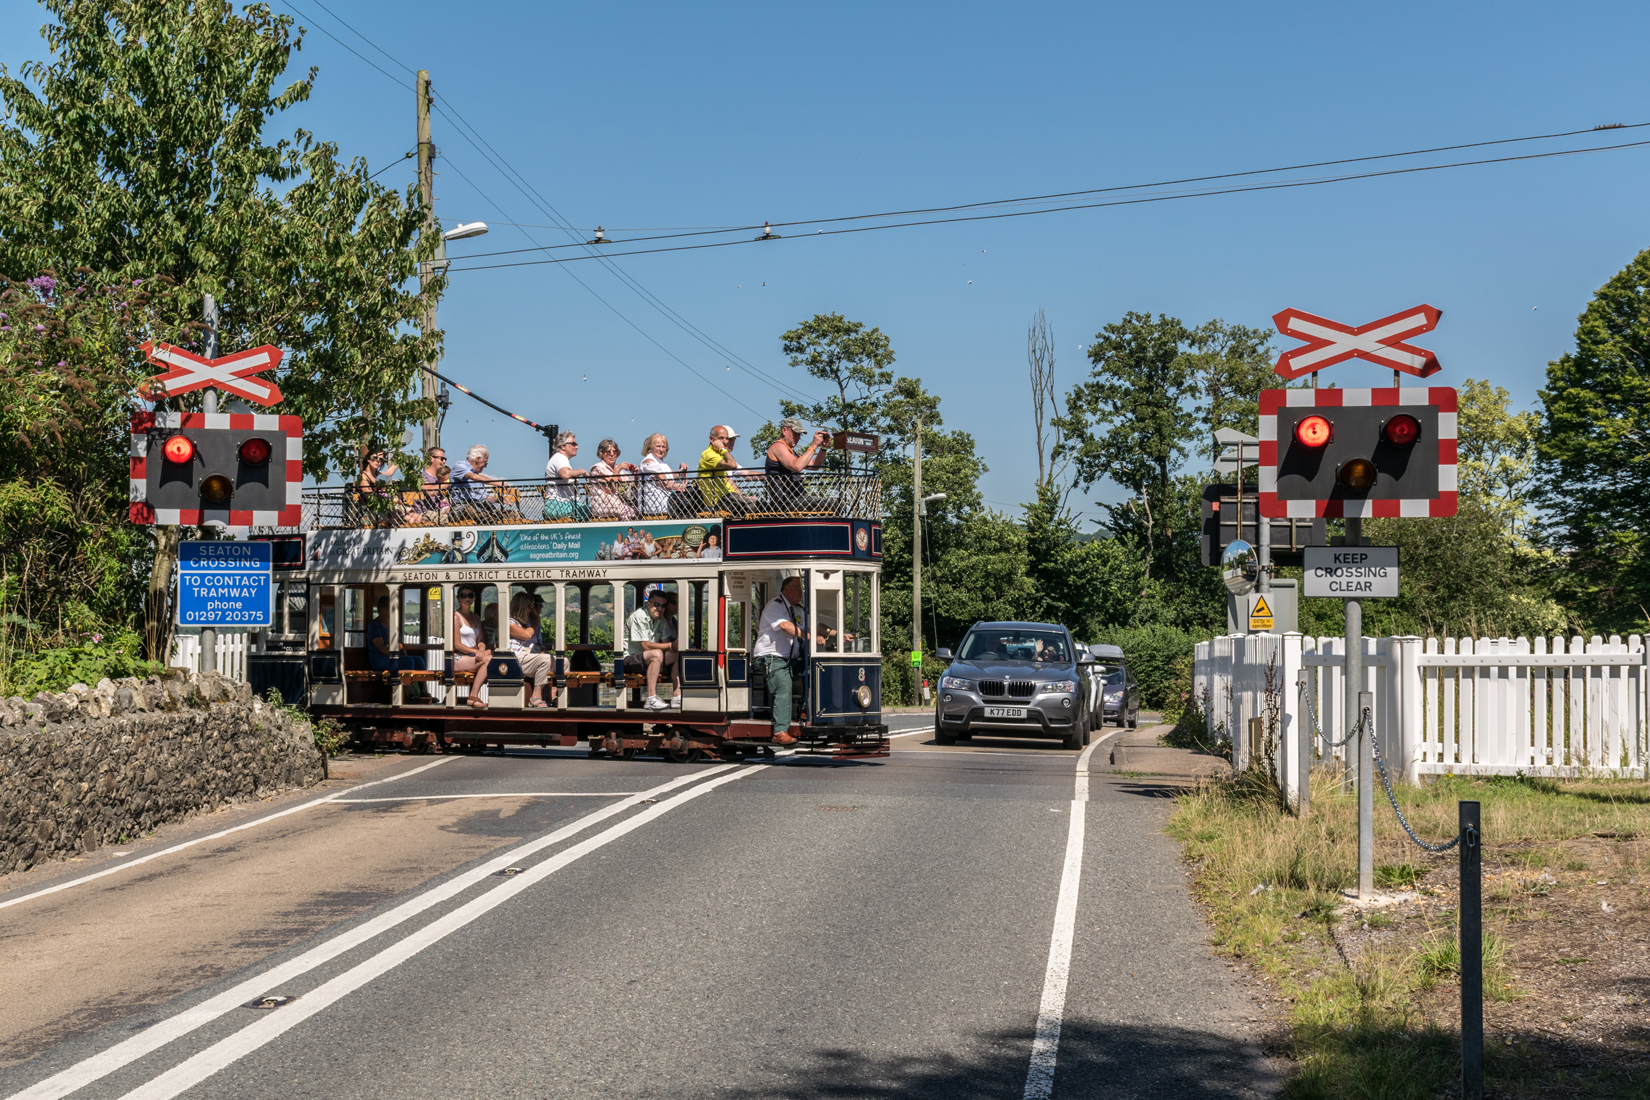 Car 8 heading south across the road at Colyford level crossing